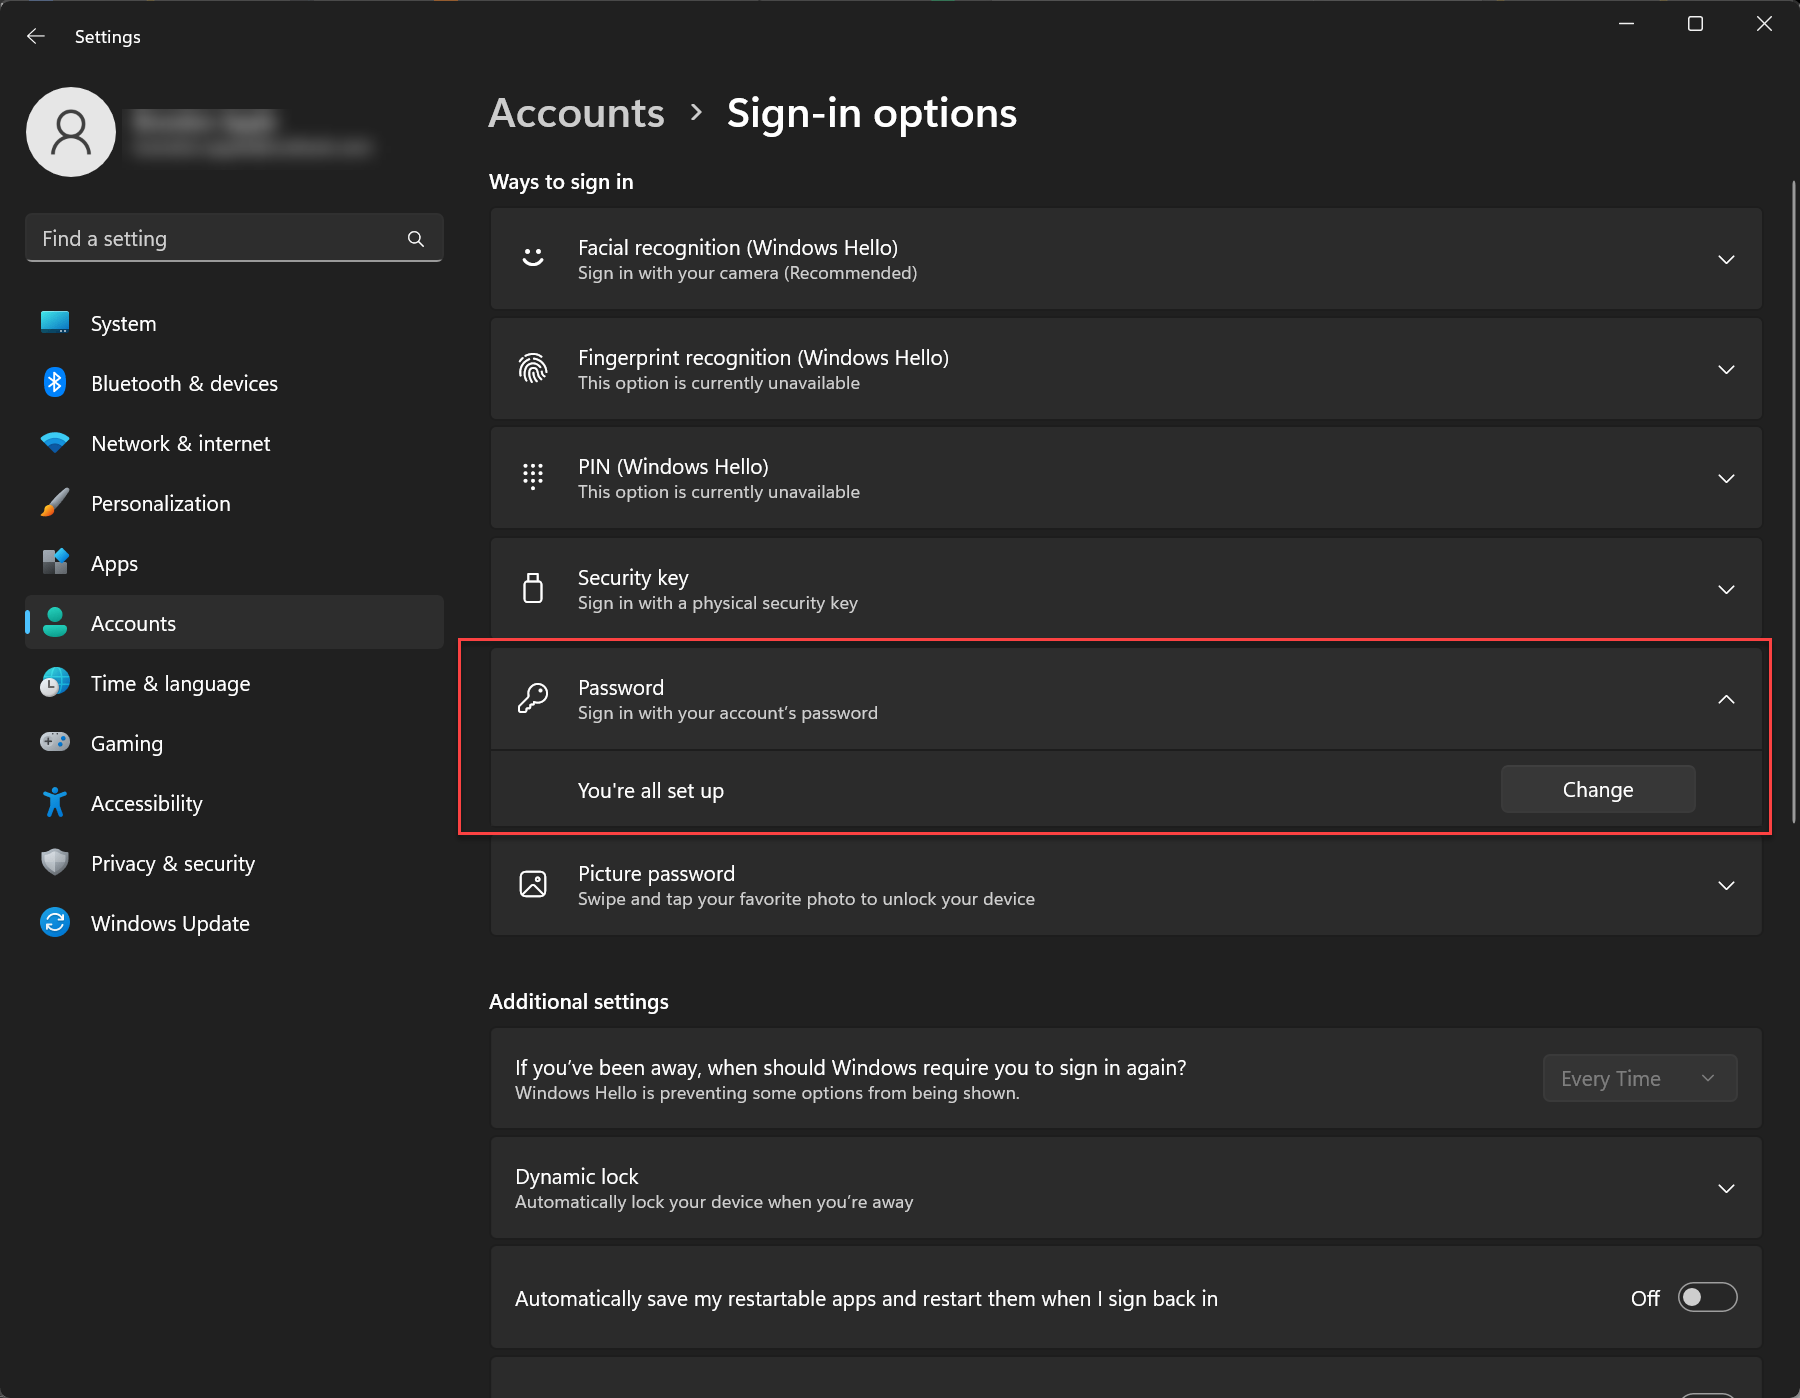 Users are taken to the Accounts screen in Windows Settings to change their password